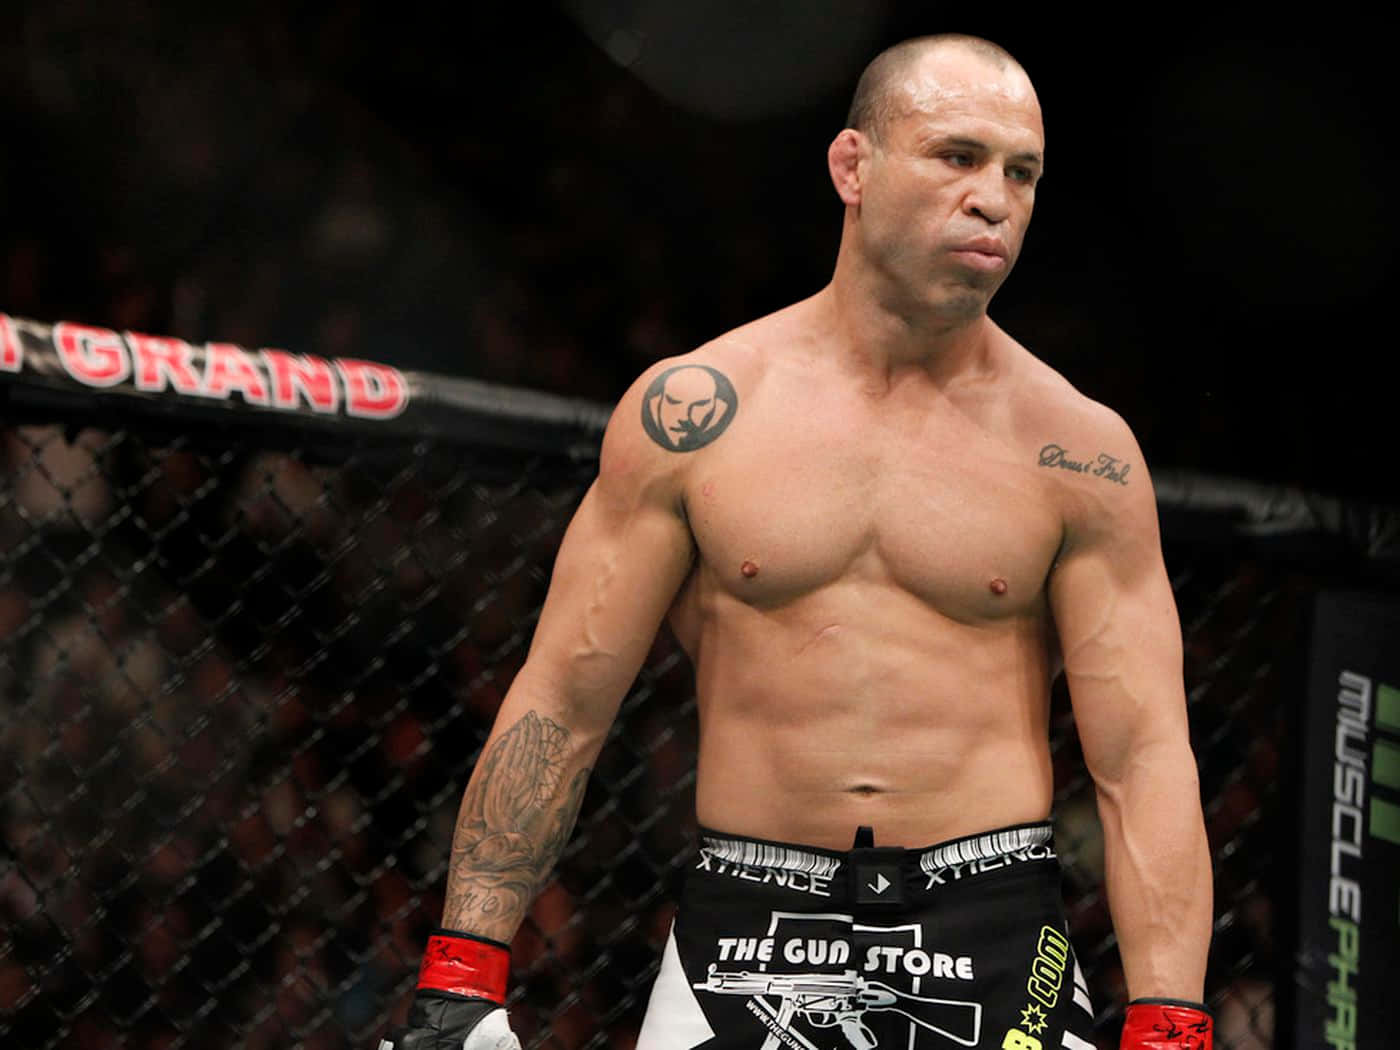 Wanderlei Silva In One Of His Matches Wallpaper